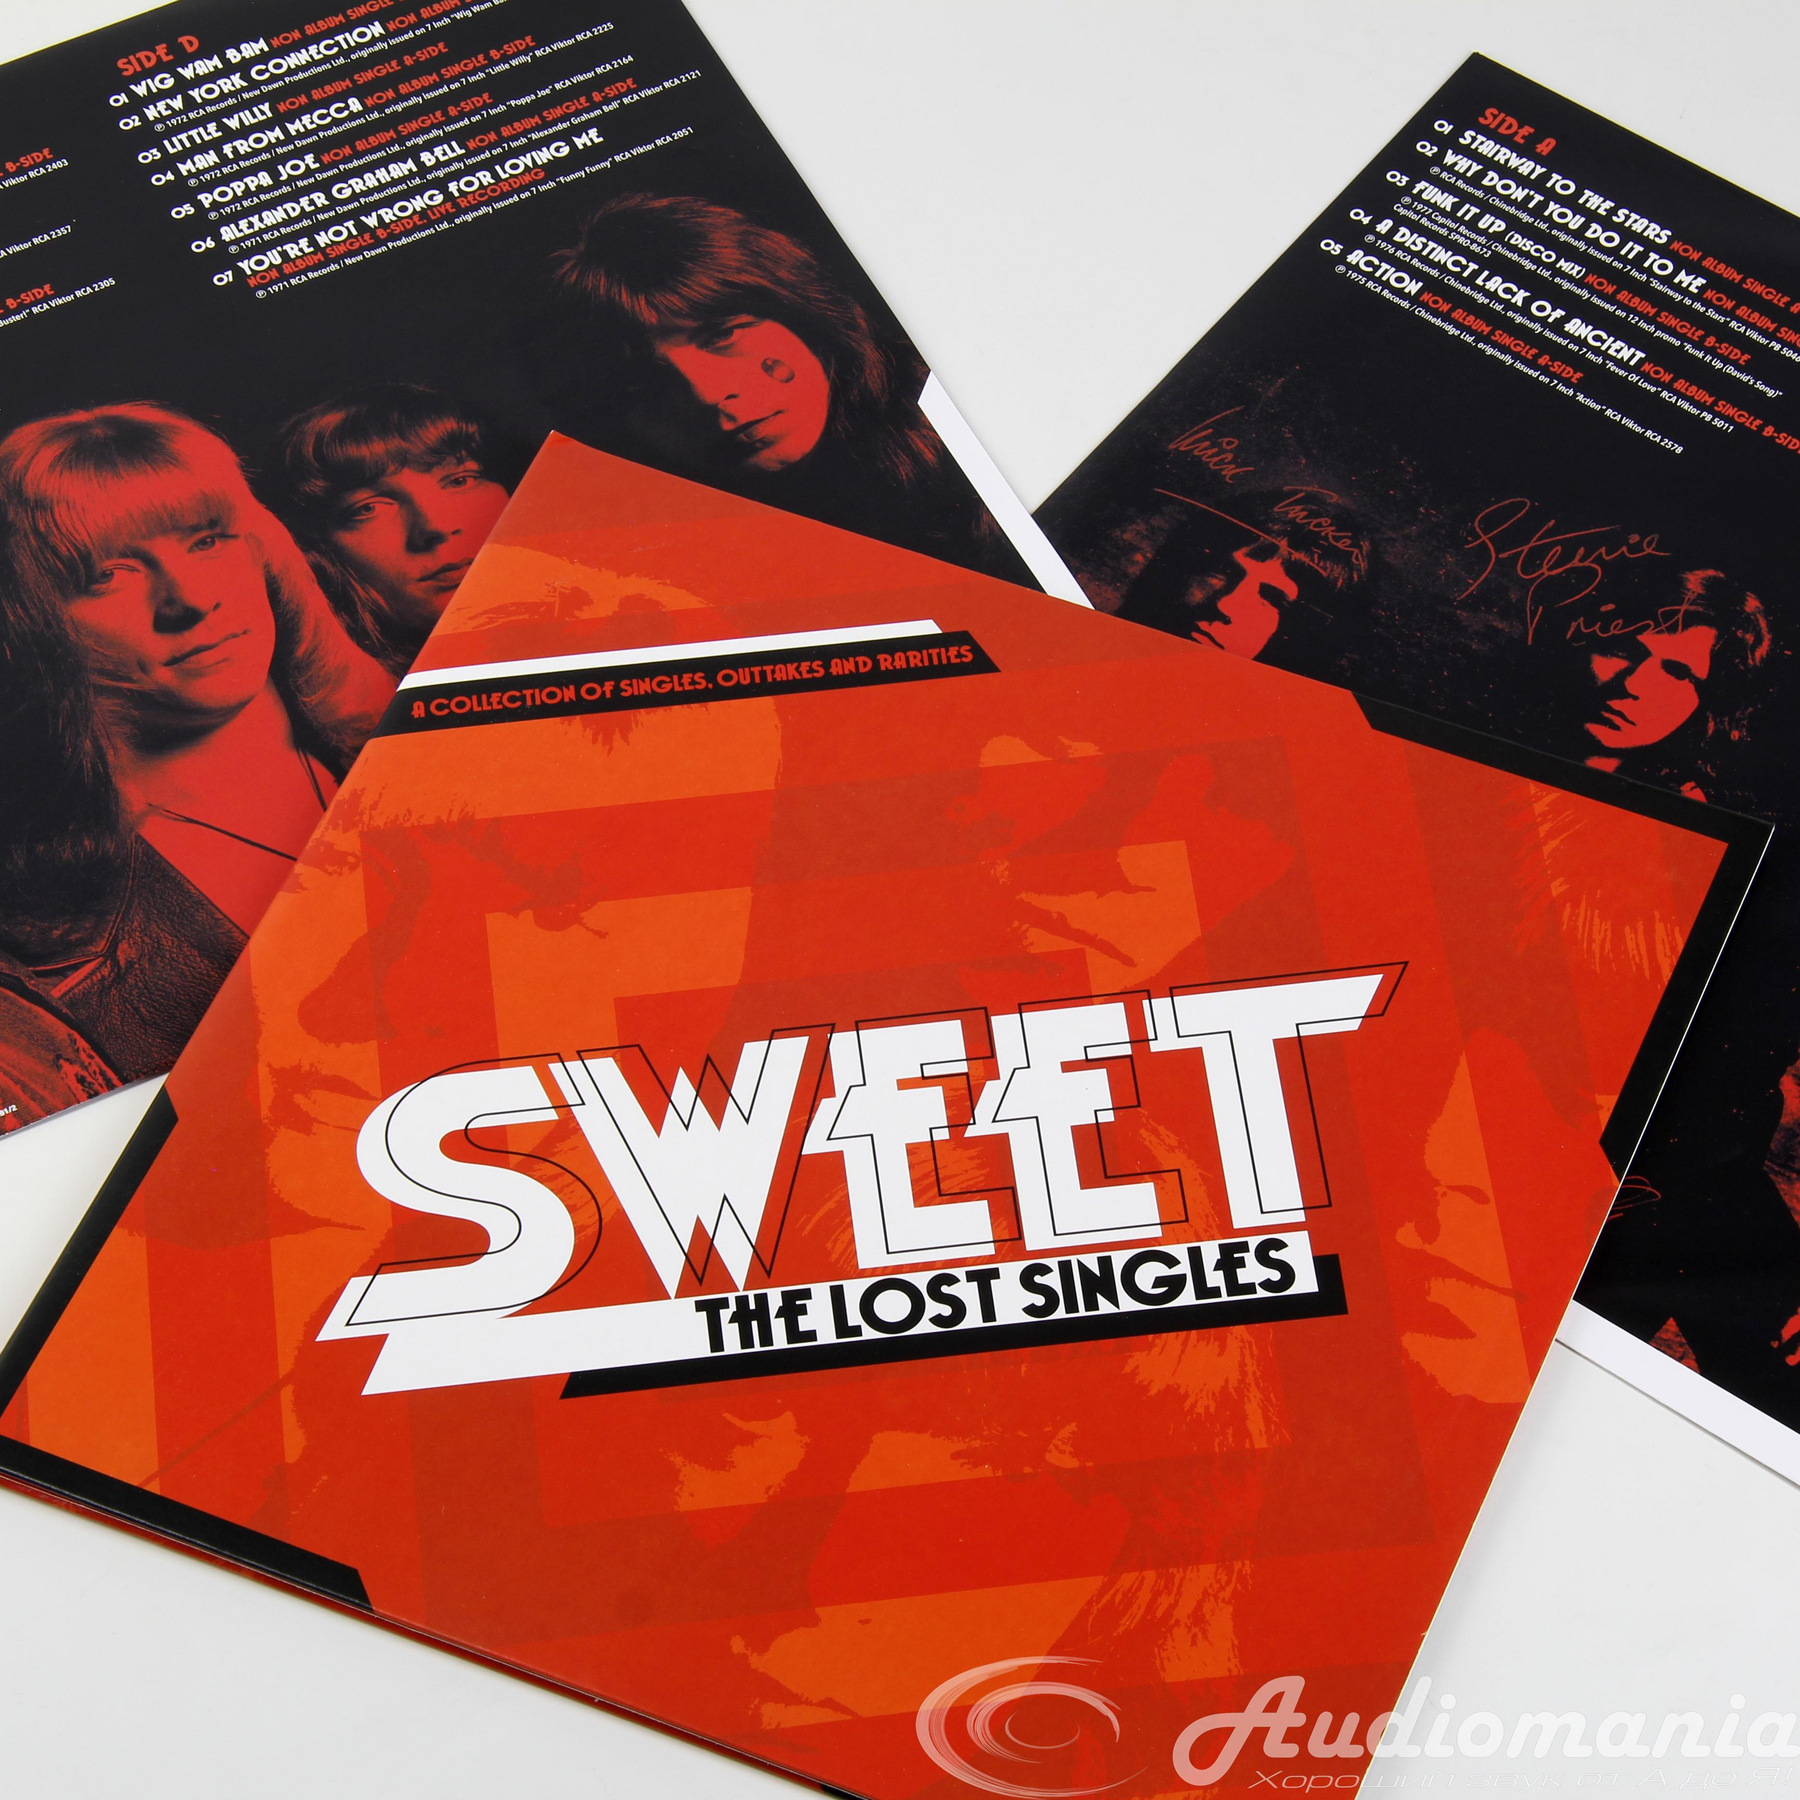 Sweet – The Lost Singles